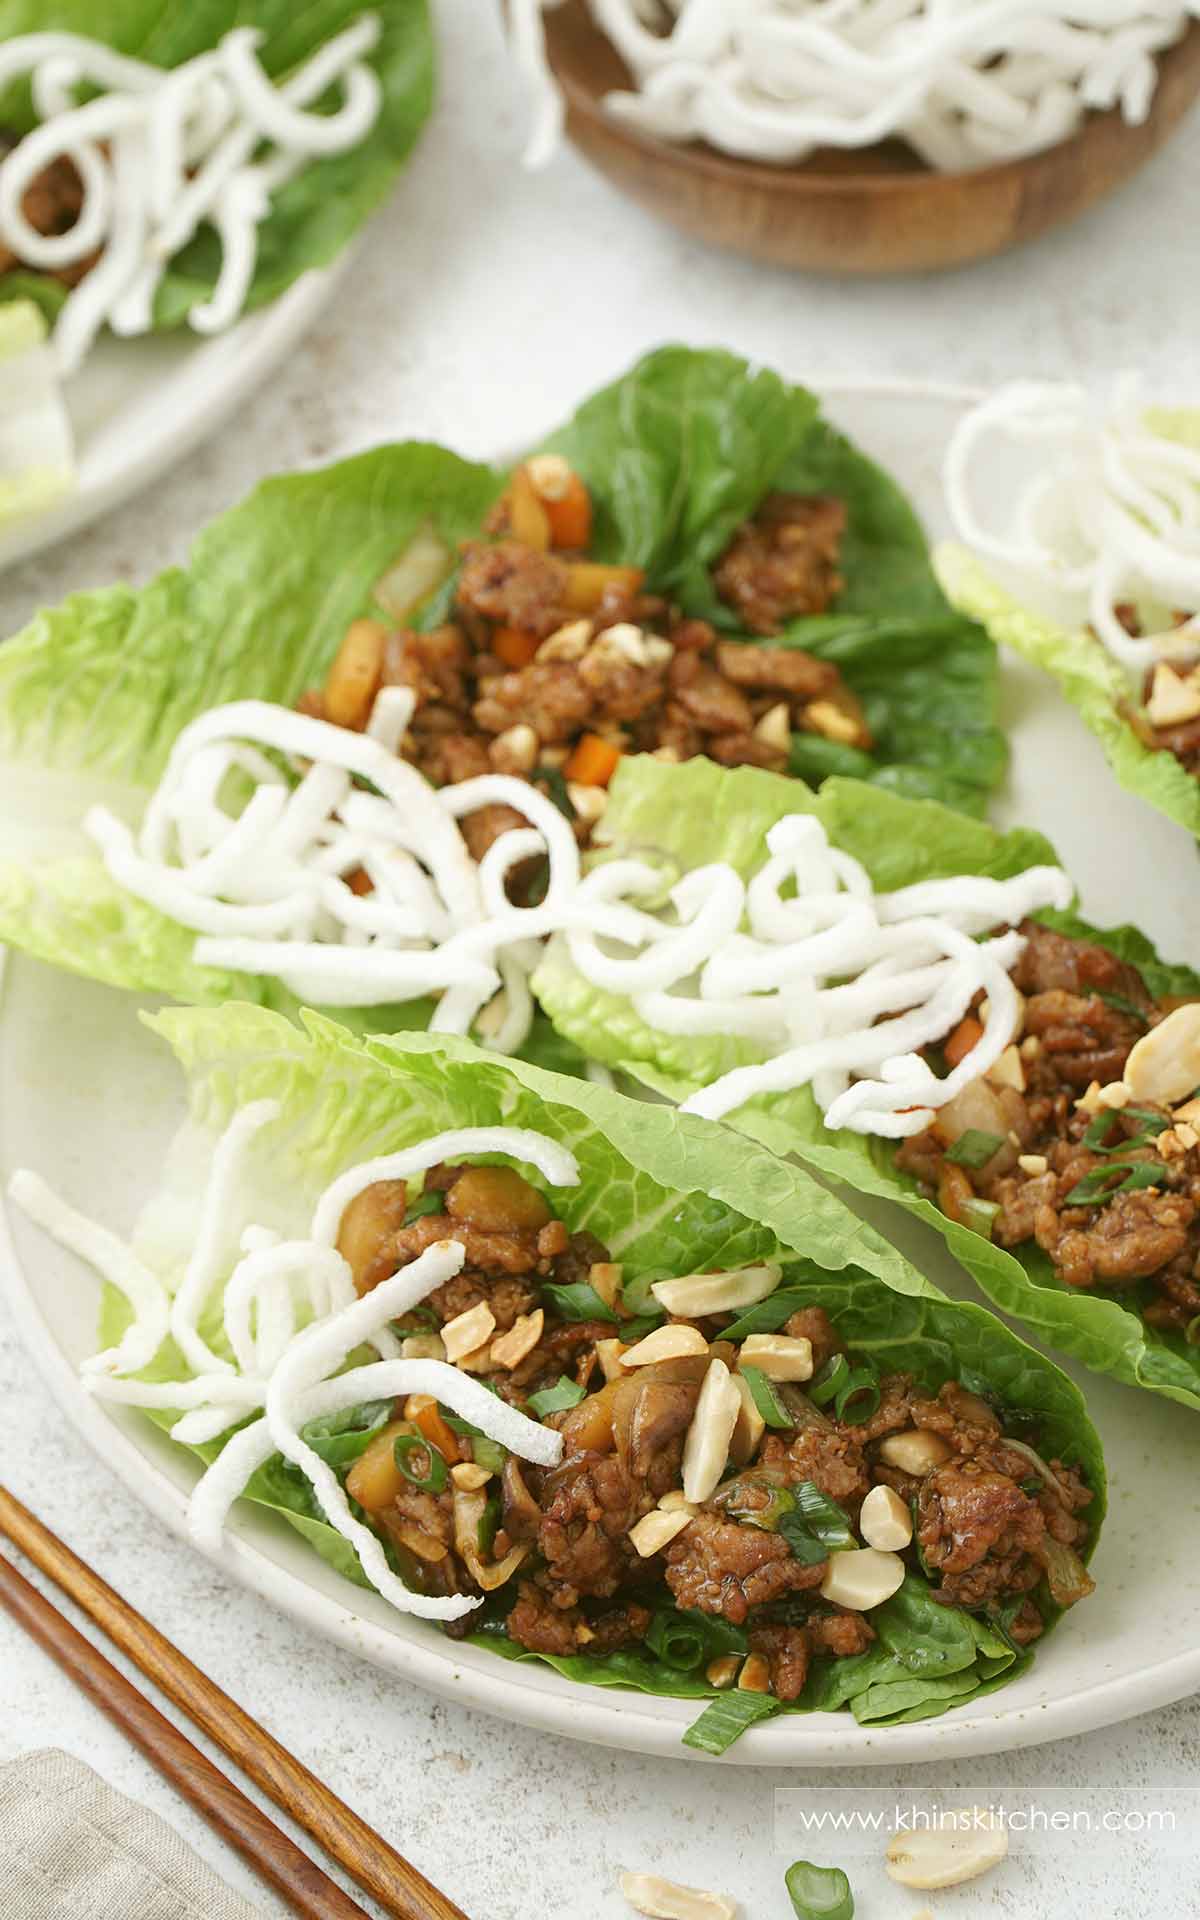 A white plate containing lettuce with chicken mince, vegetables, peanuts and fried rice stick.